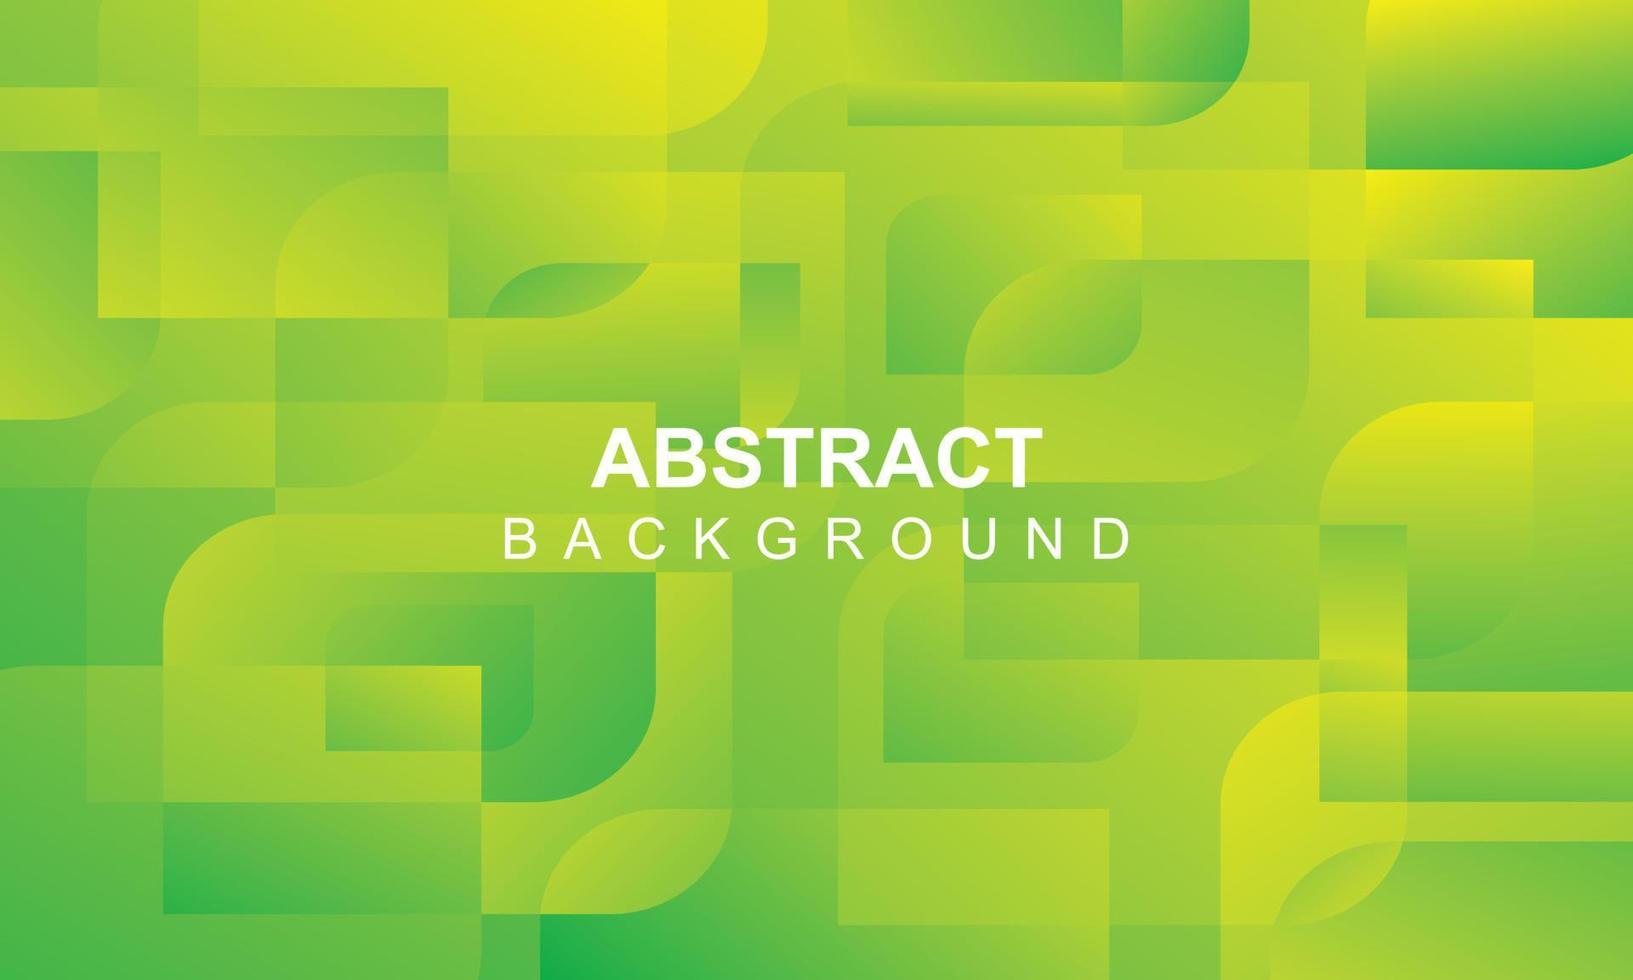 Abstract vector design for banner and background design template with green color concept